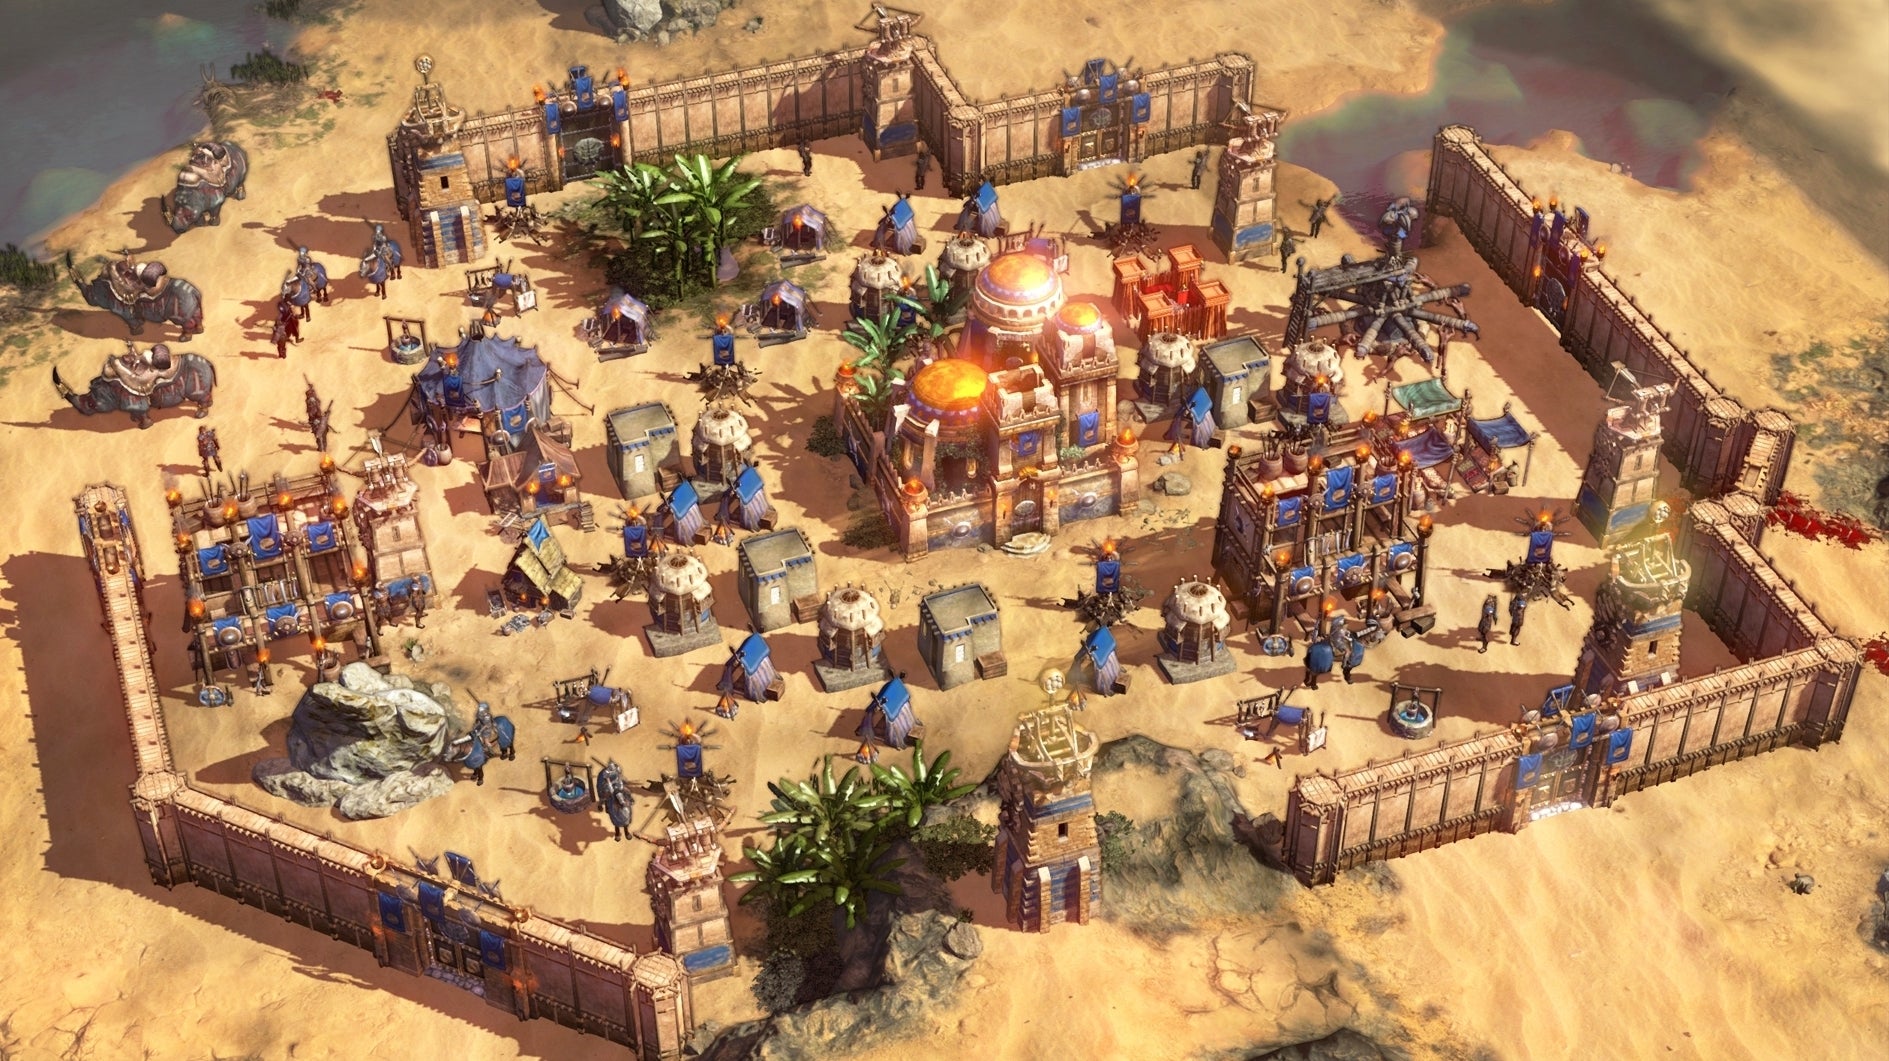 Image for Petroglyph shows off "survival RTS" Conan Unconquered in new video